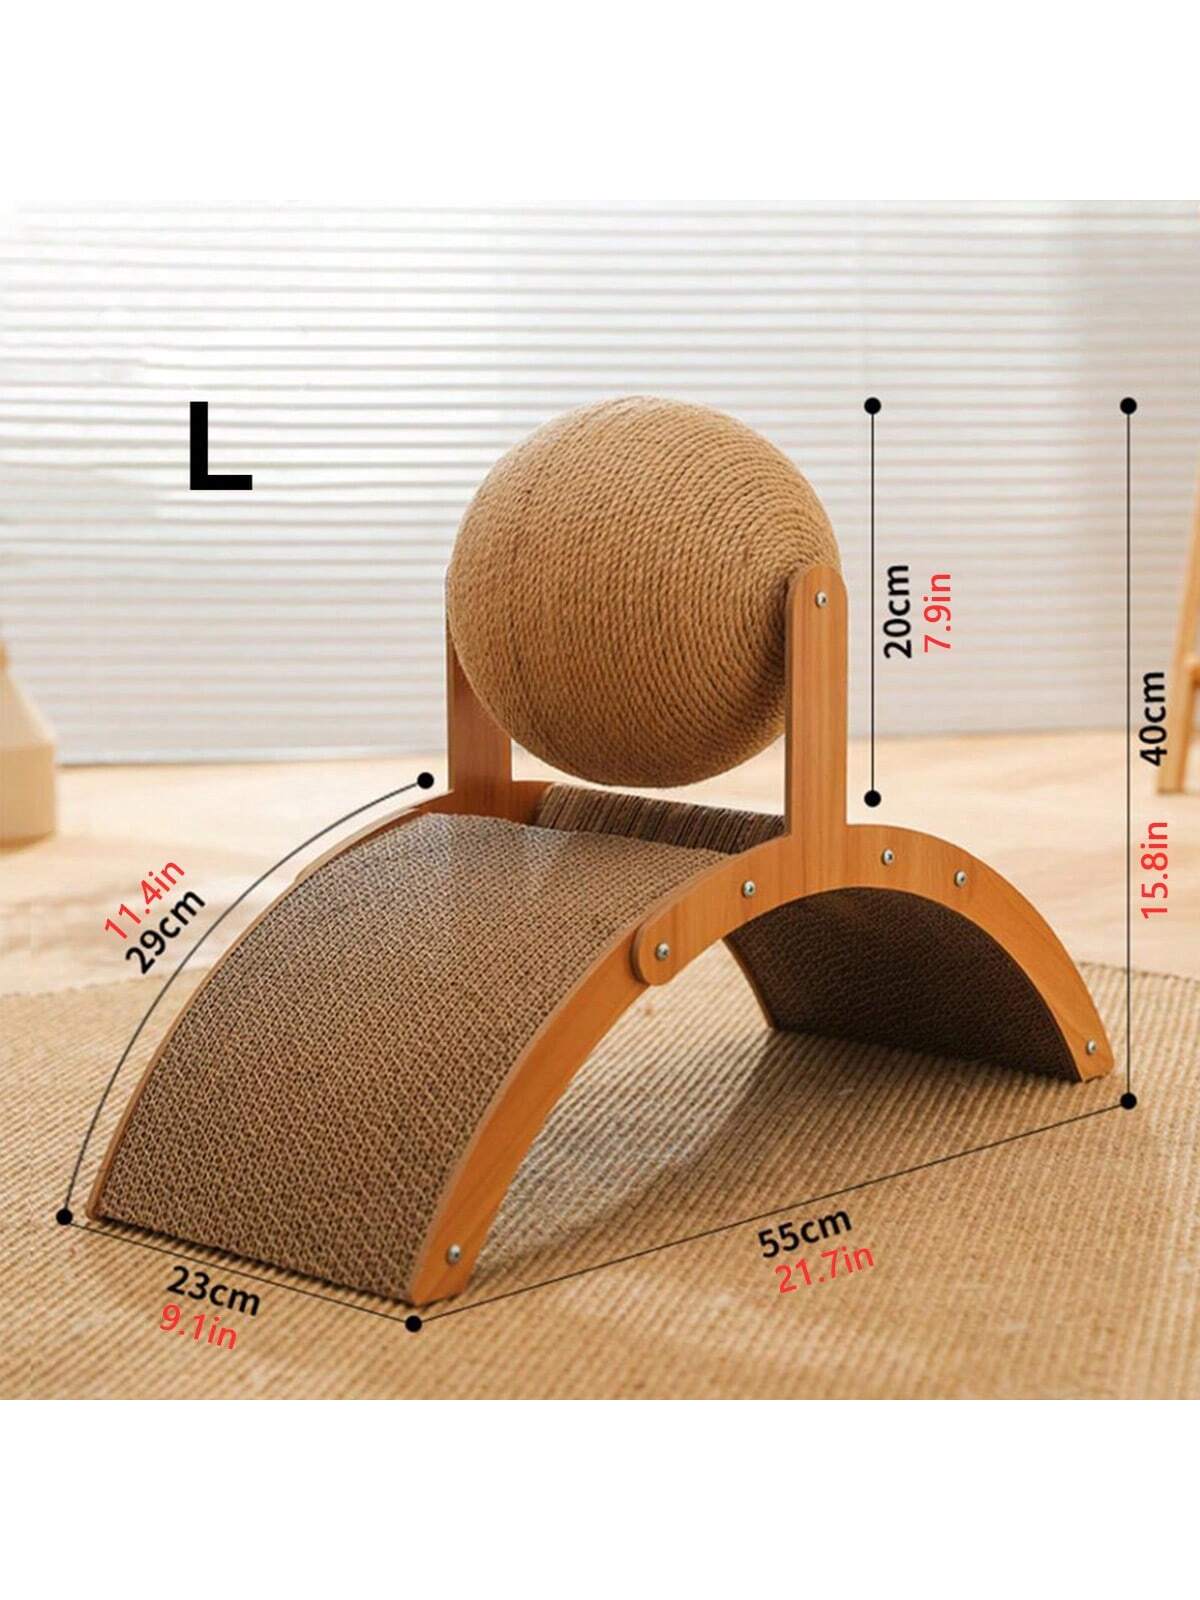 1pc Arch-shaped Cat Scratching Post With Sisal Ball And Sword-shaped Toy, Durable And Easy To Assemble, Comes With Installation Tool